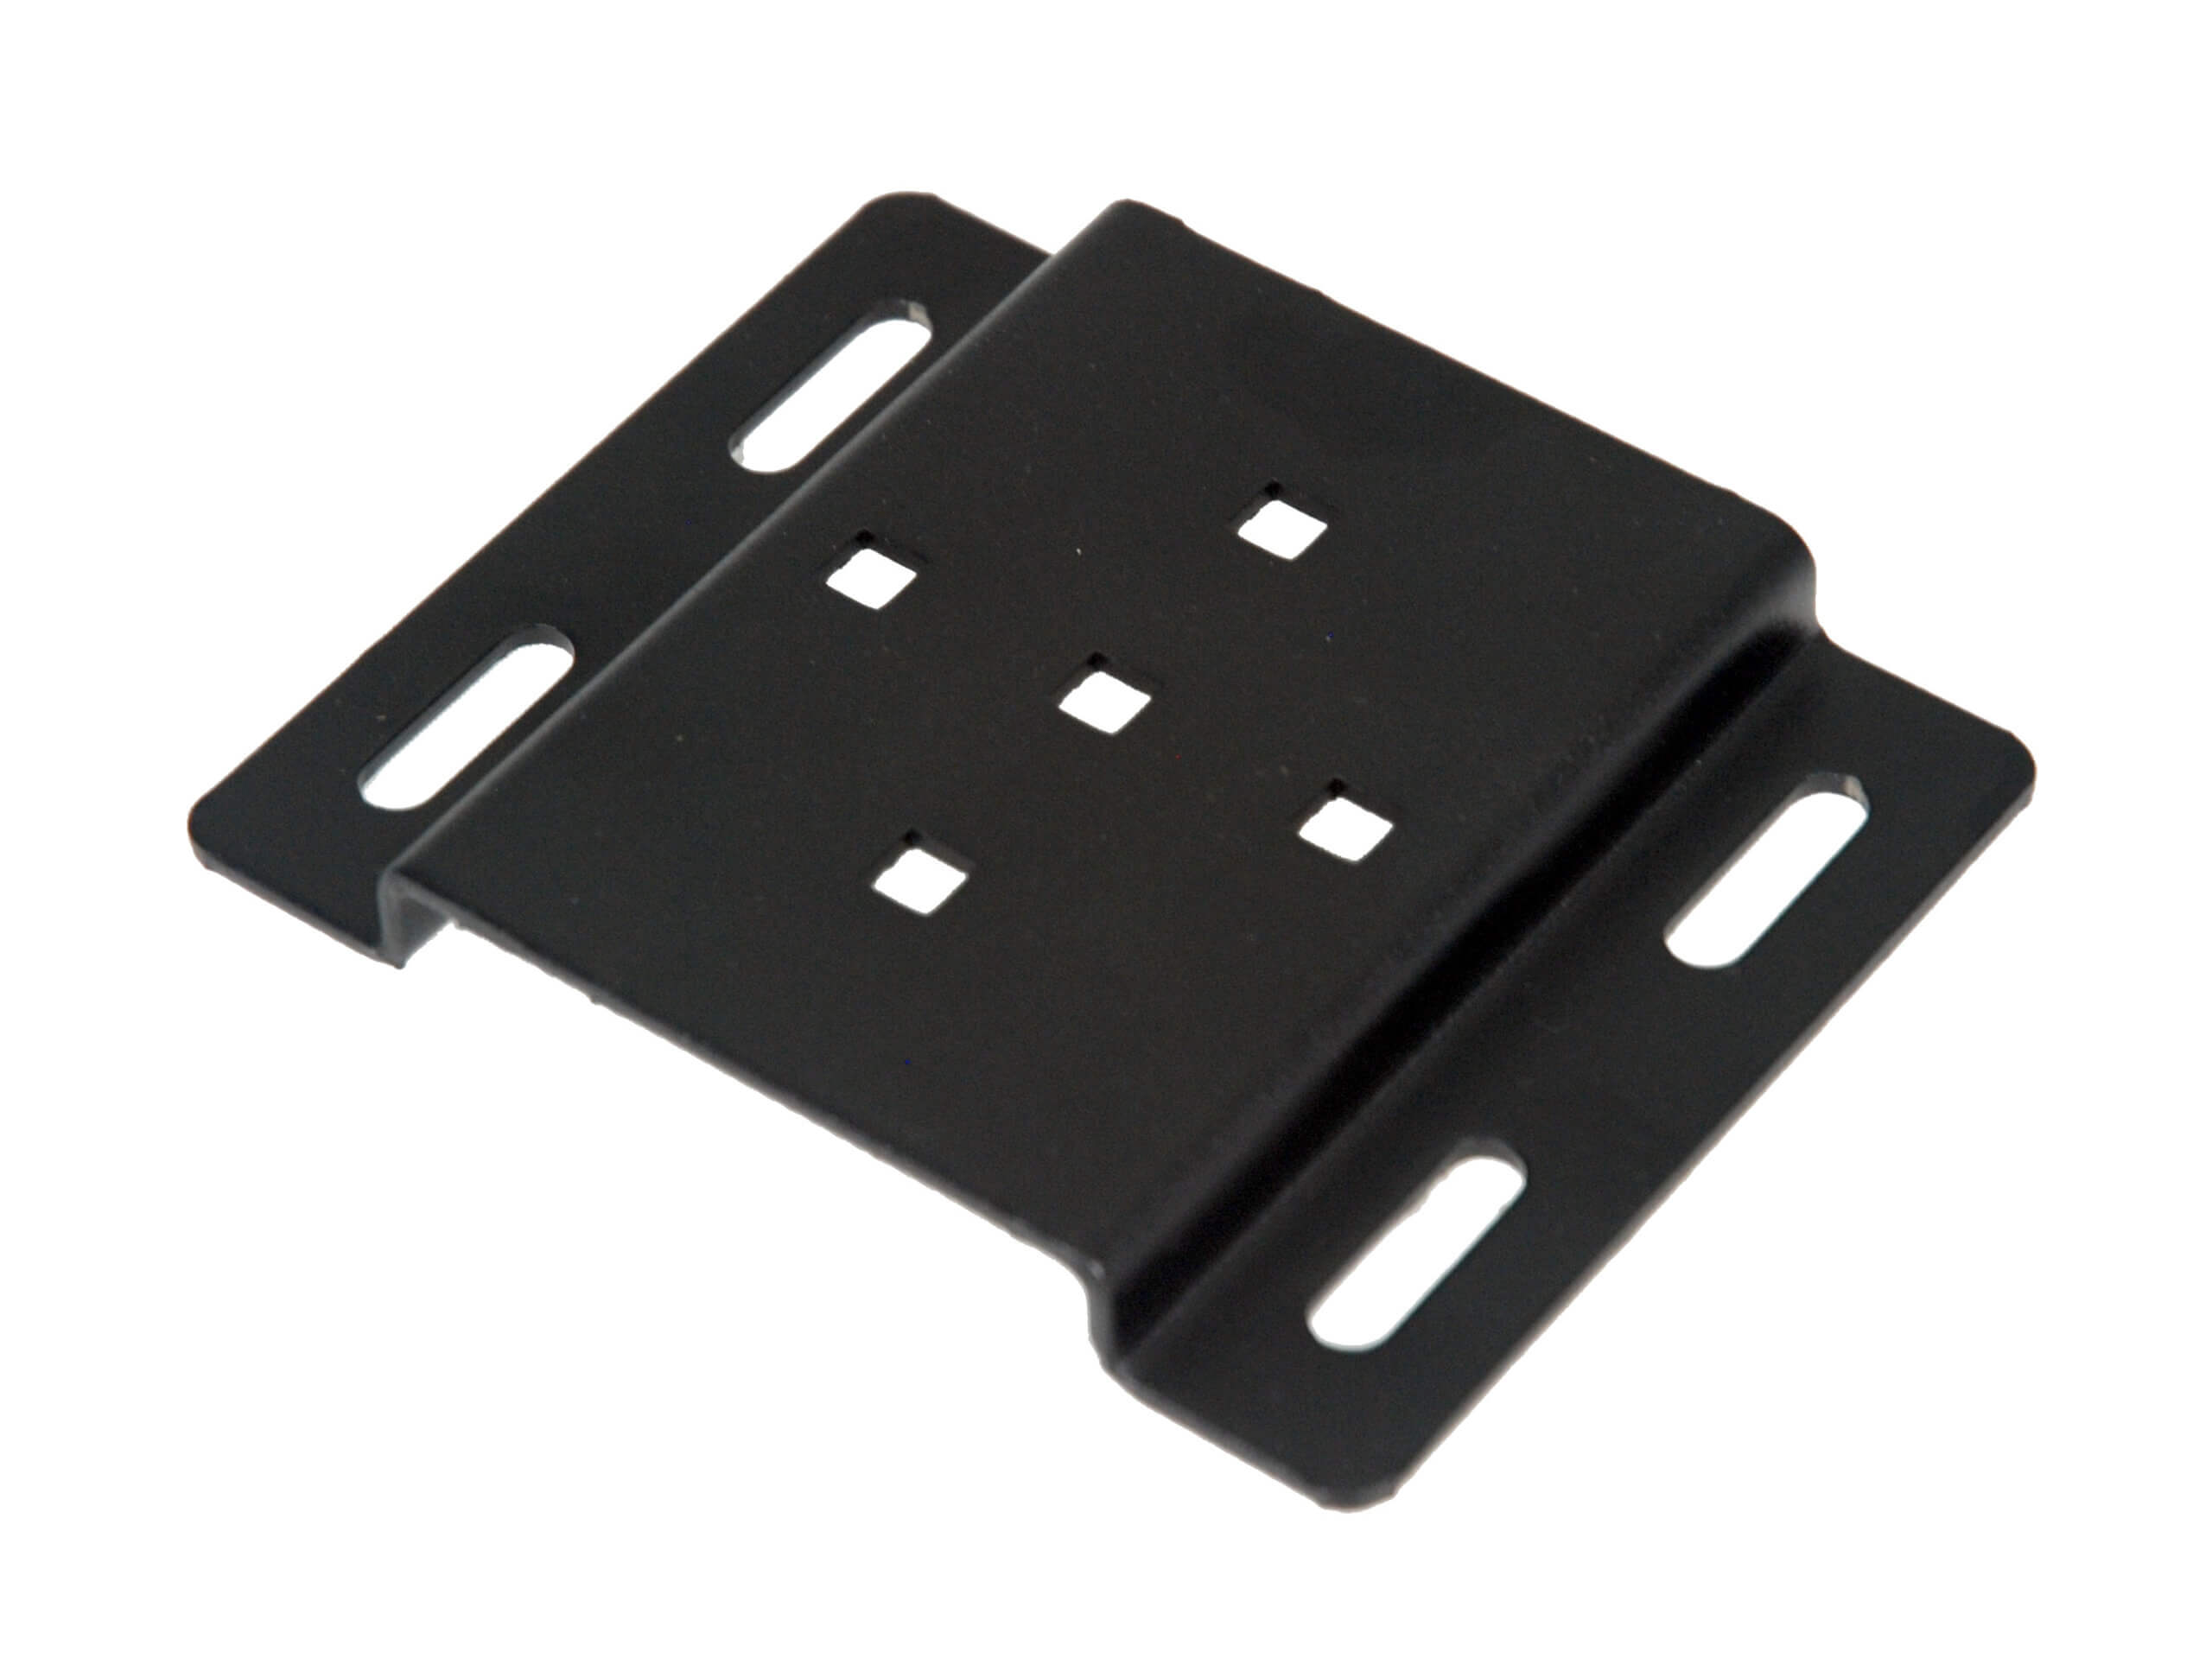 DISCONTINUED – Adapter Plate that allows for Mounting Laptop computer to a C-PM-101 Printer Mount Housing